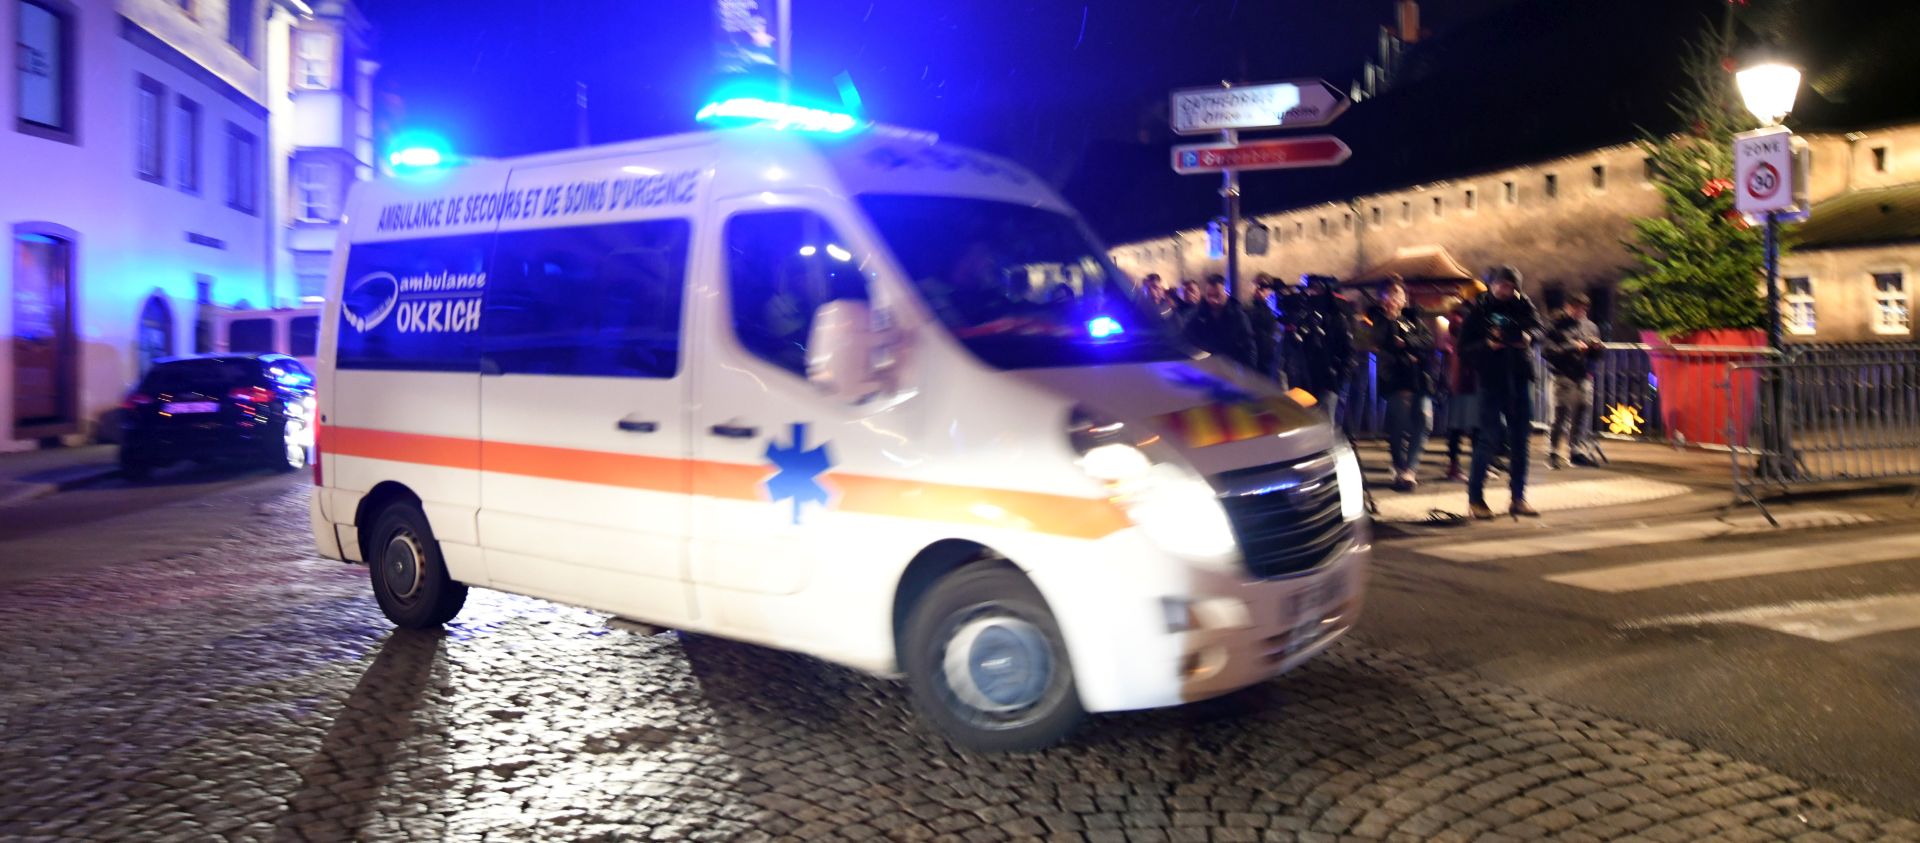 epa07224664 A French emergency vehicle enters the shooting site at the Christmas Market in Strasbourg, Alsace, France, 11 December 2018. According to latest report, two people are dead and 11 people are injured. The gunman is reported to be at large and the motive for the attack is still unclear.  EPA/PATRICK SEEGER